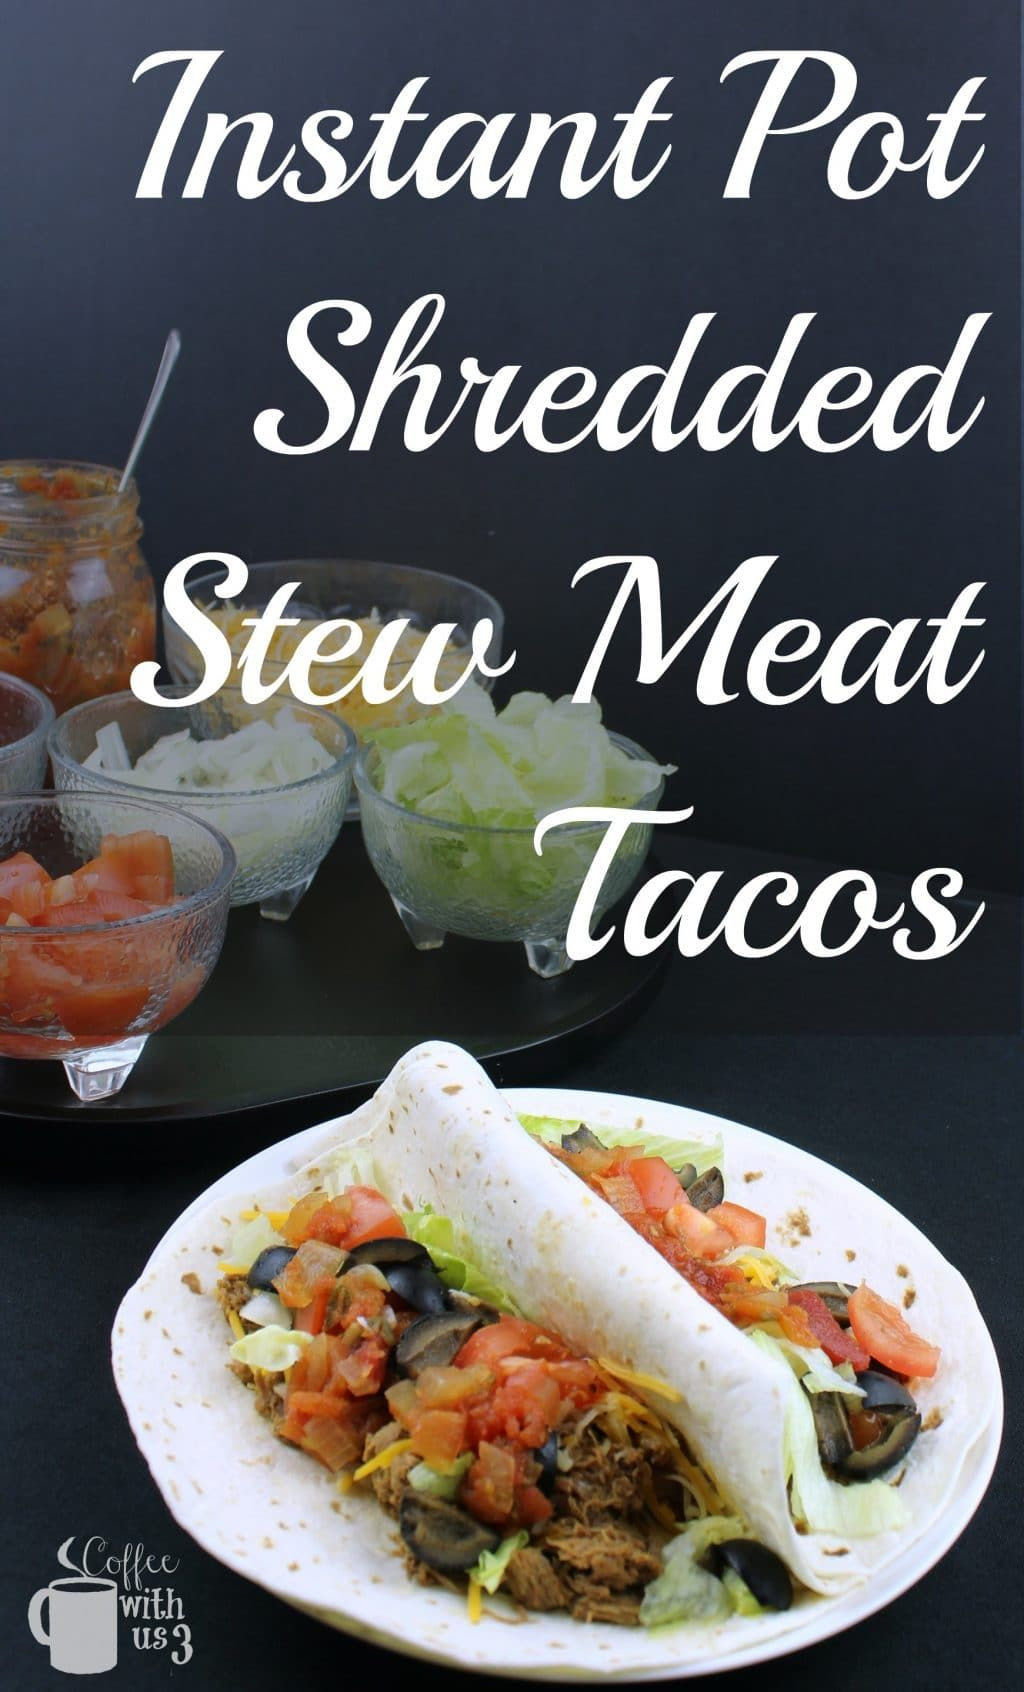 Stew Meat Tacos
 Instant Pot Shredded Stew Meat Tacos is a great way to use